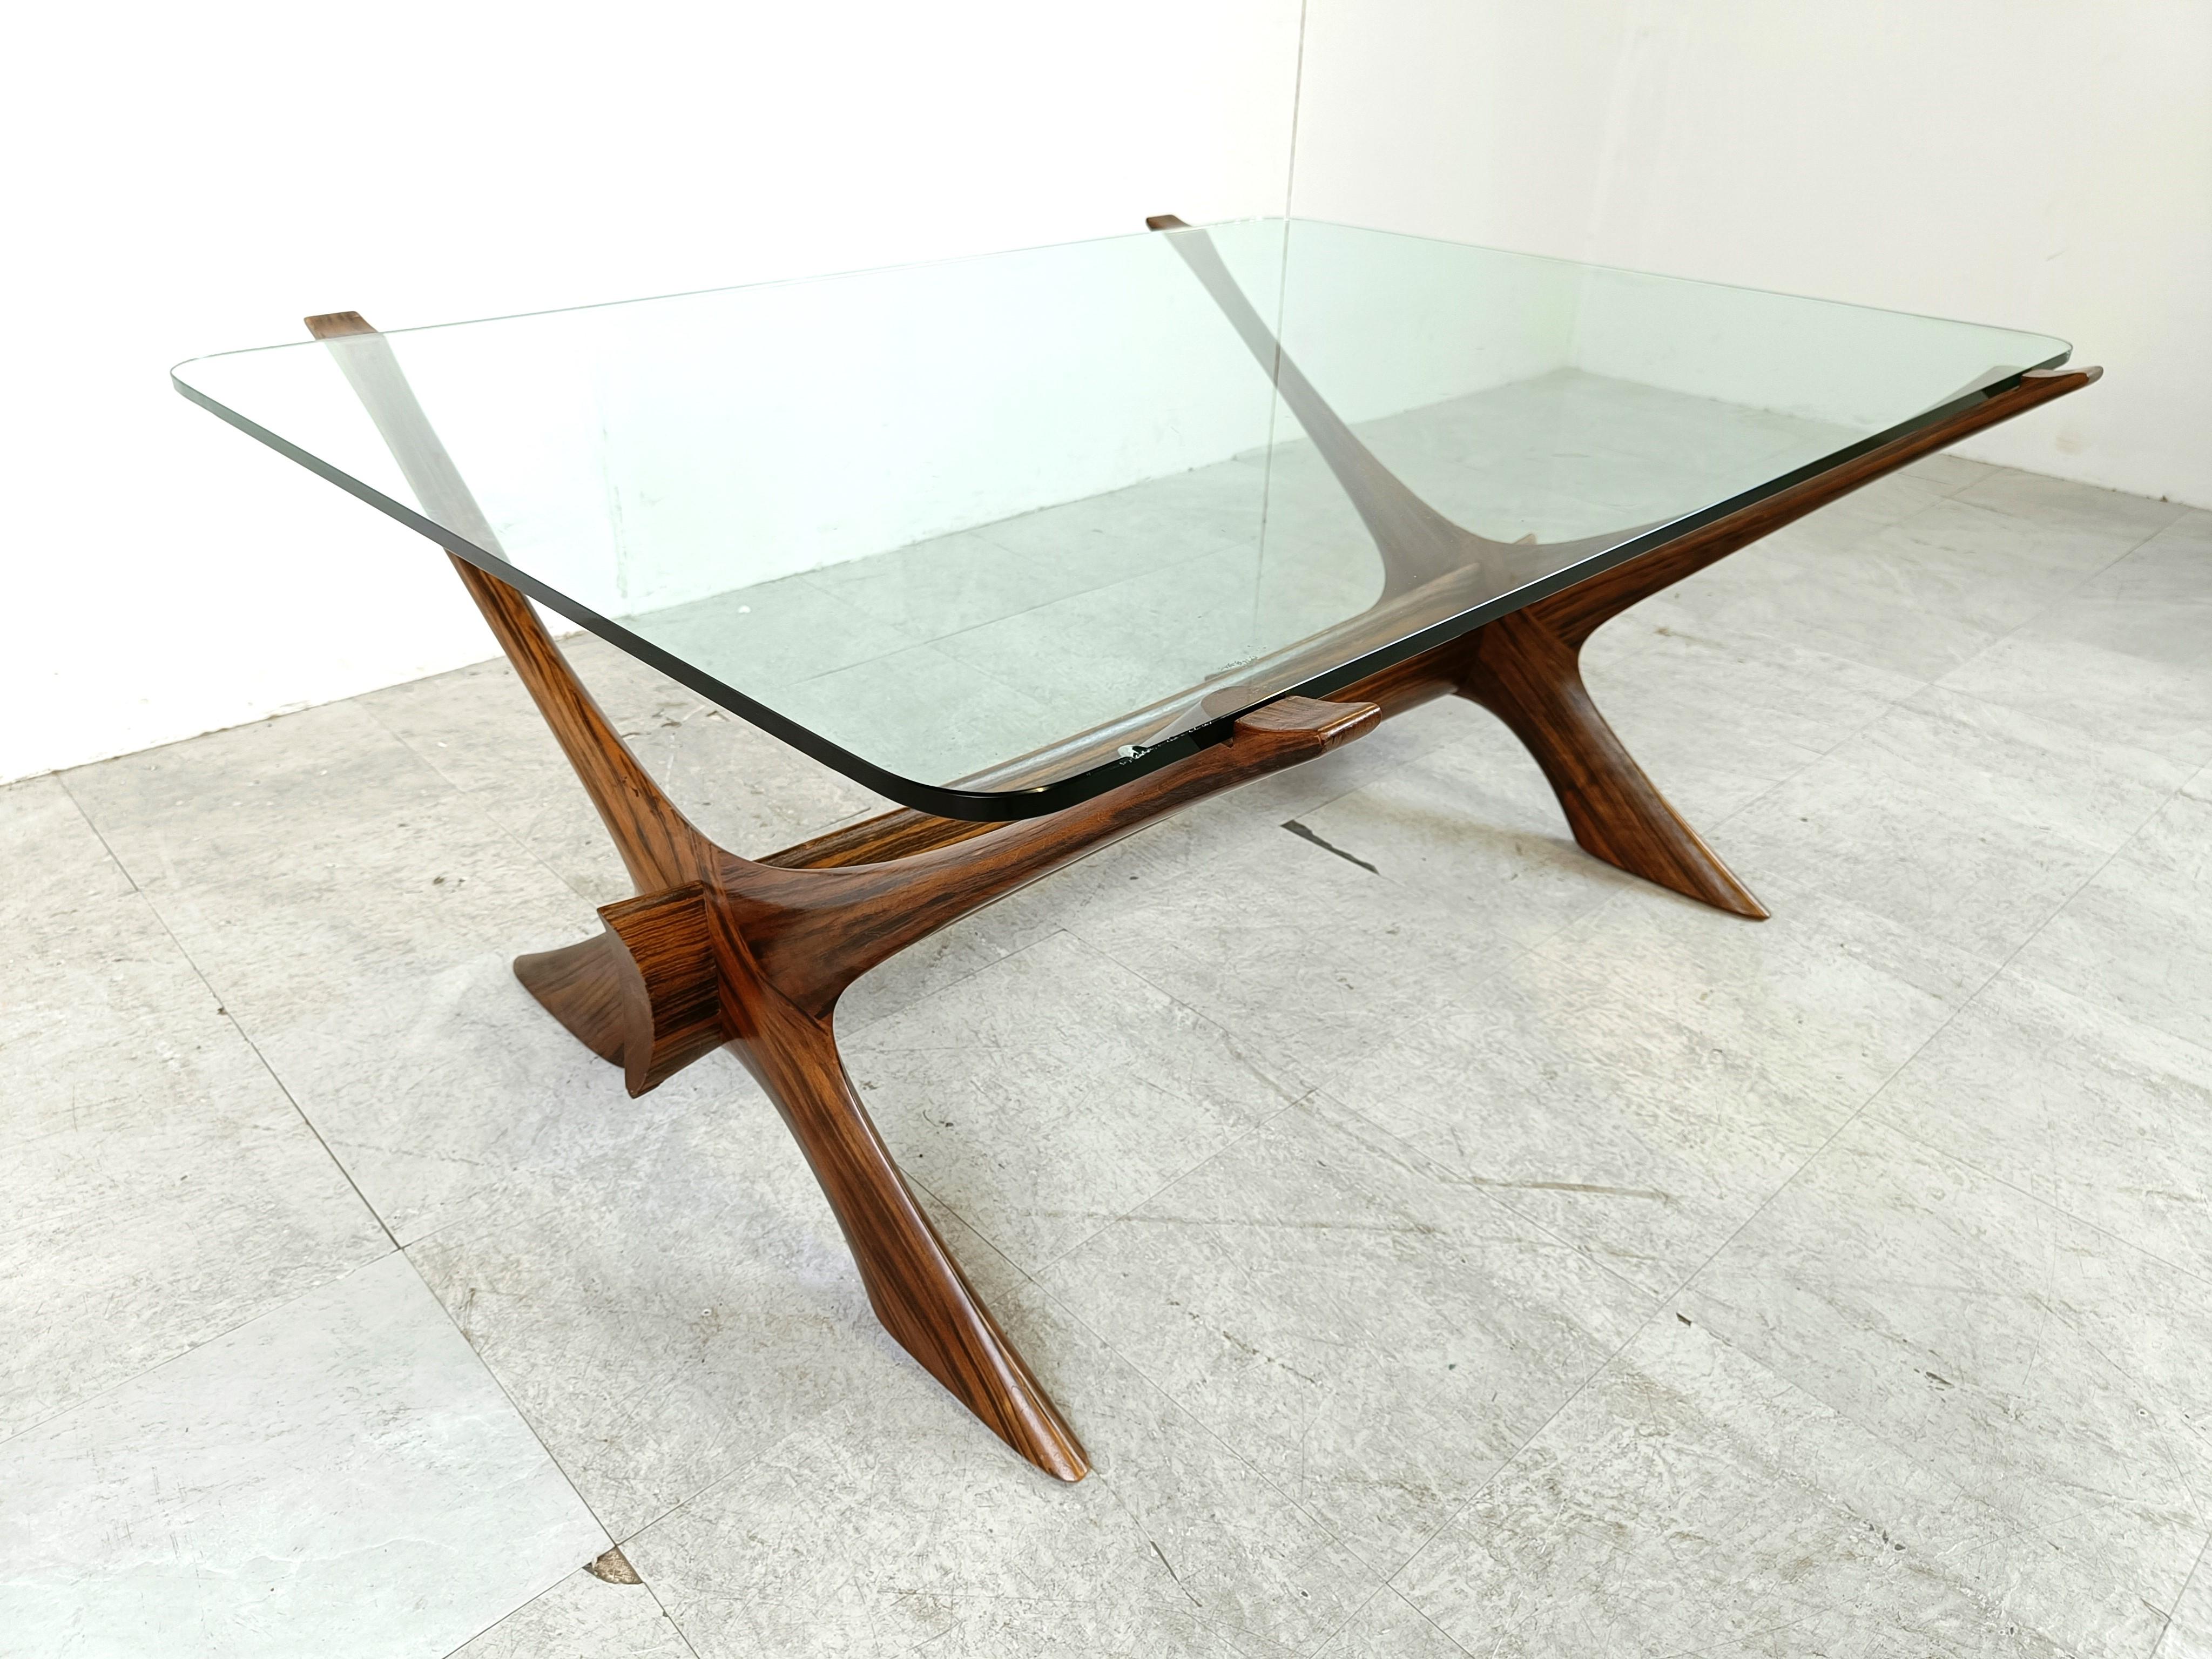 Condor Coffee Table by Fredrik Schriever-Abeln, Sweden, 1960s For Sale 4